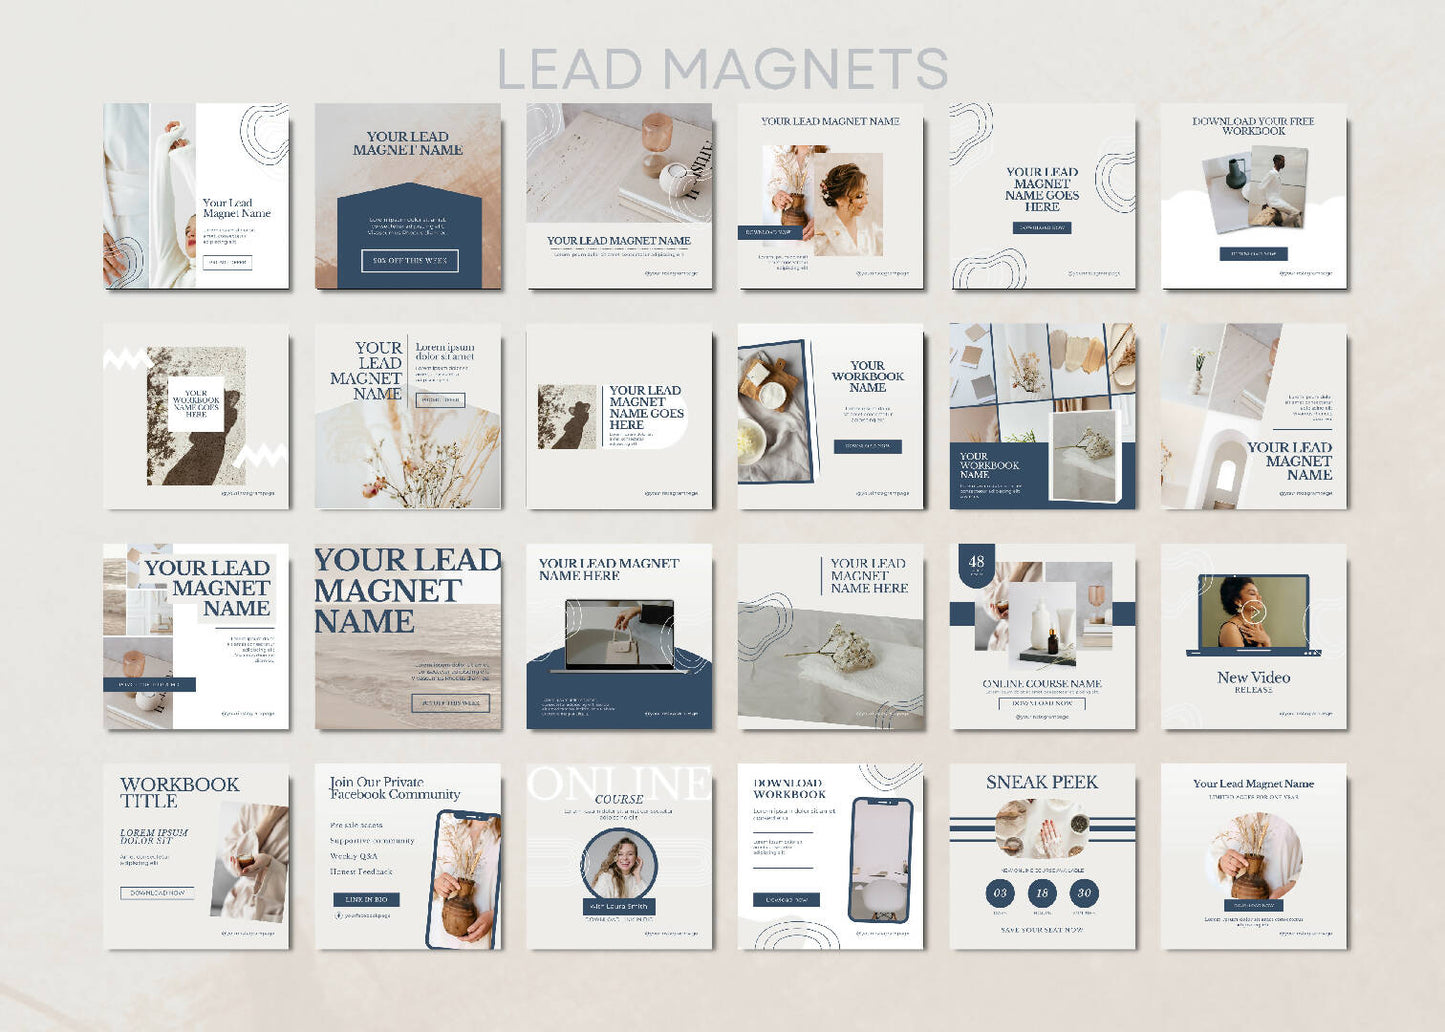 Instagram Multipurpose Canva Lead Magnet Template Bundle. Best for Coaching, Fashion, Social Media Management and Wellness.